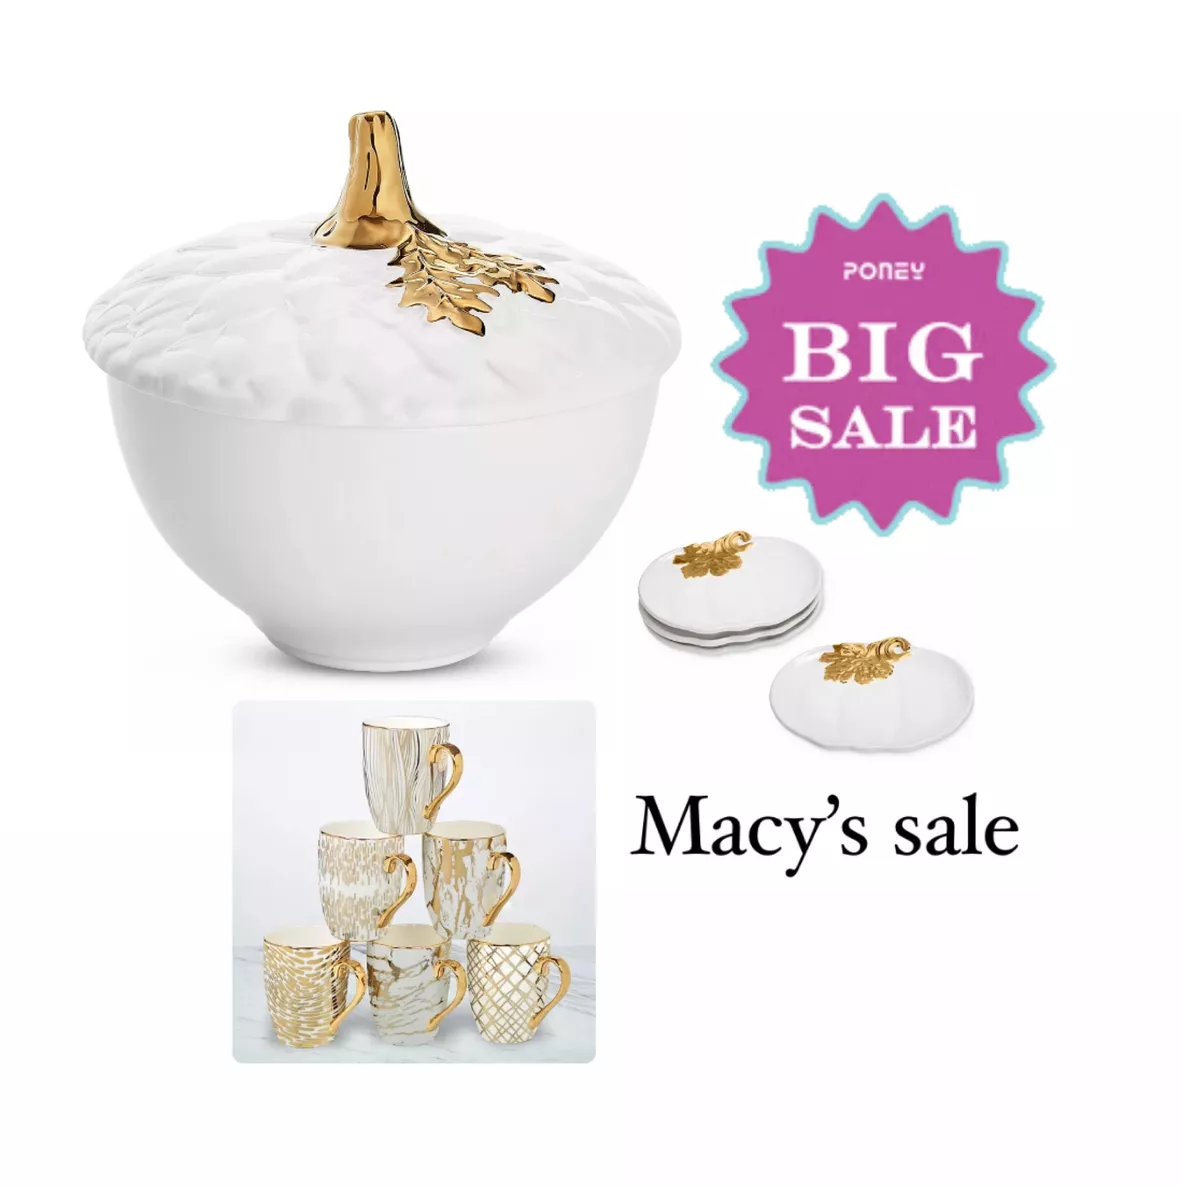 Martha Stewart Collection Set of 4 Prep Bowls with Lids, Created for Macy's  - Macy's